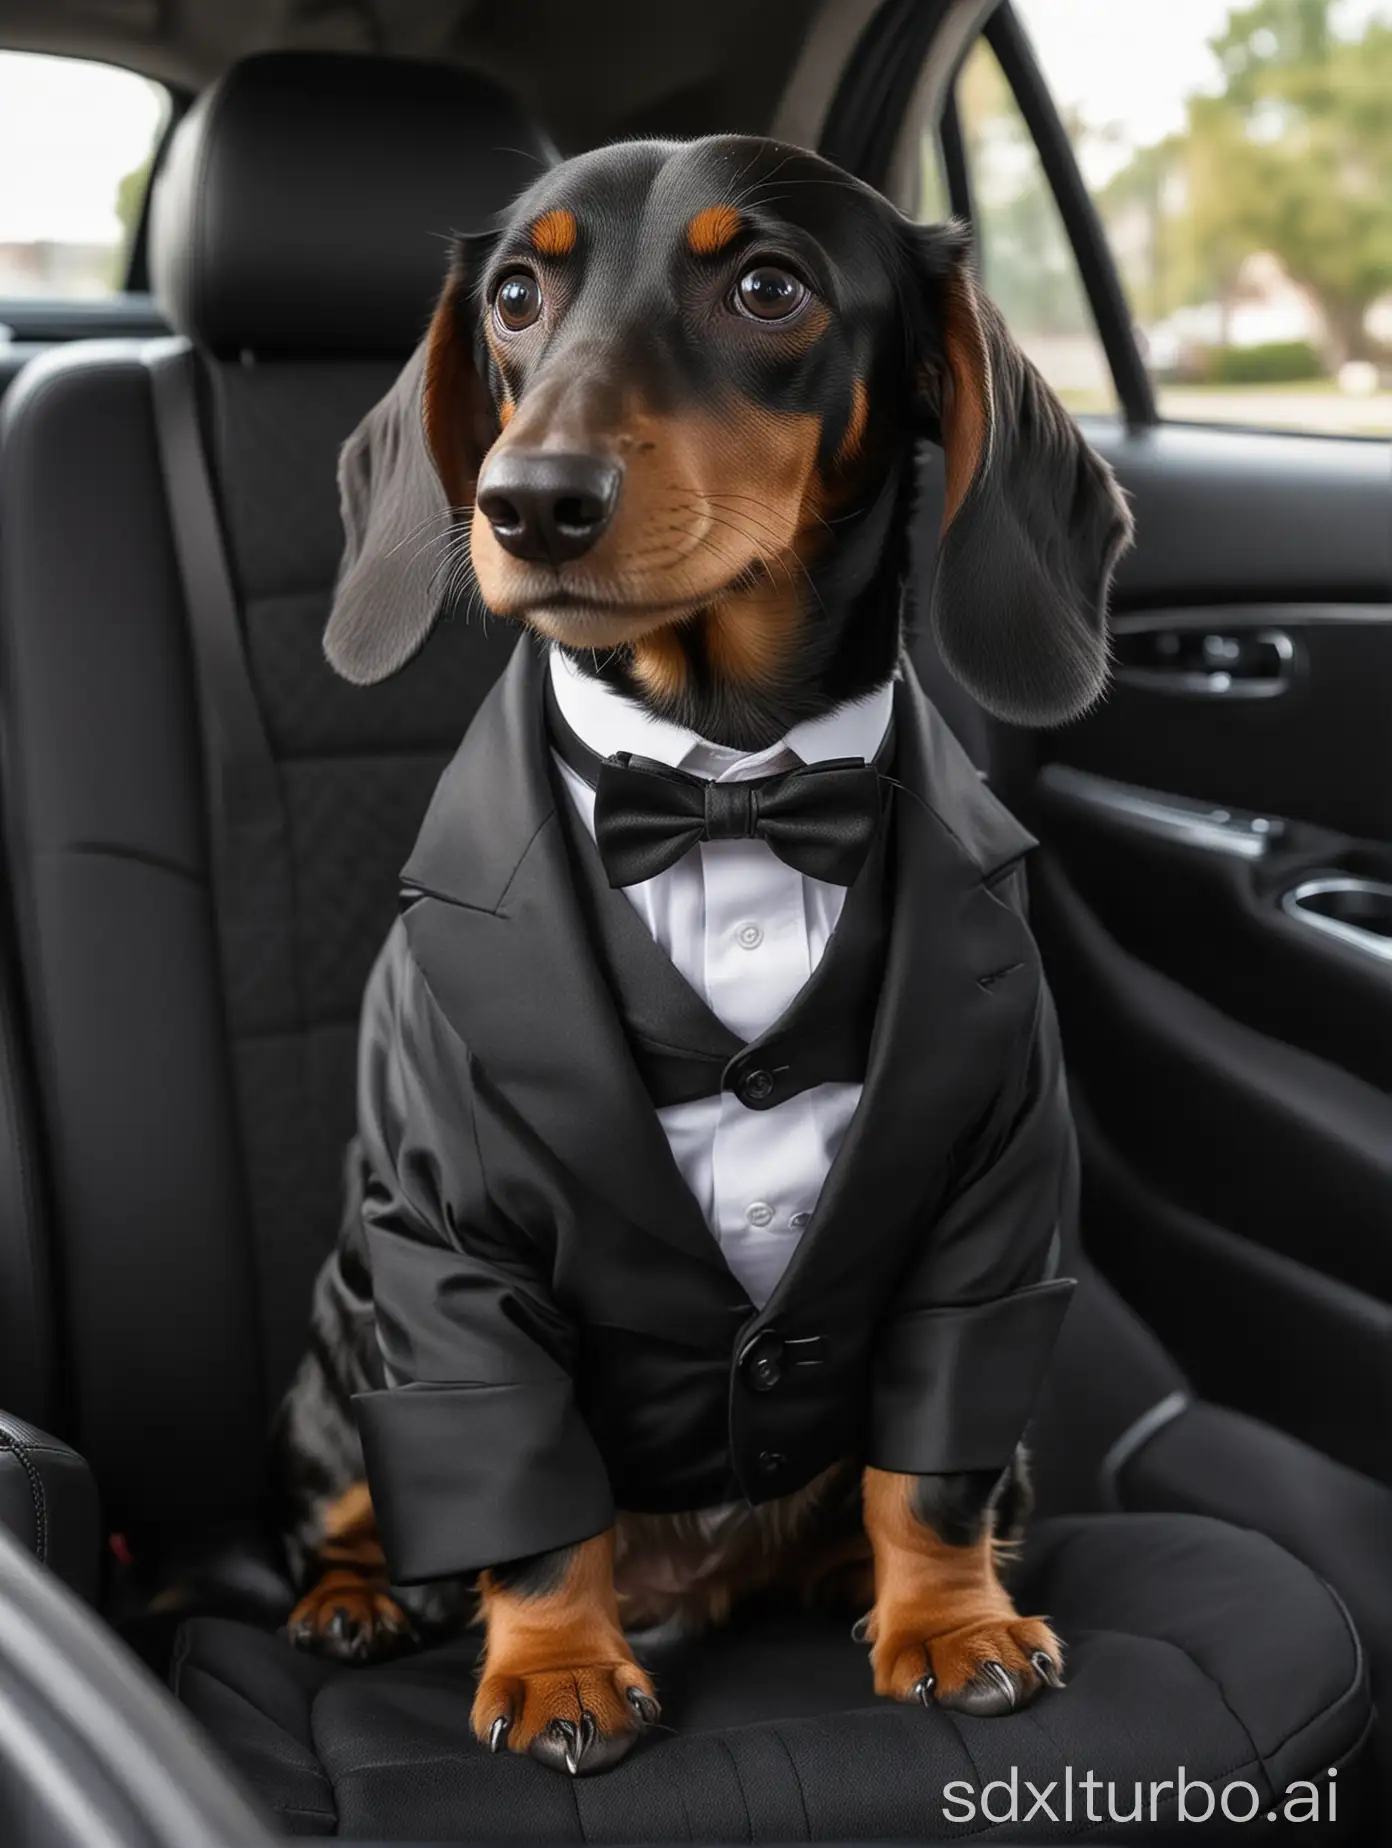 Black dachshund dog in a tuxedo suit on a luxurious car seat